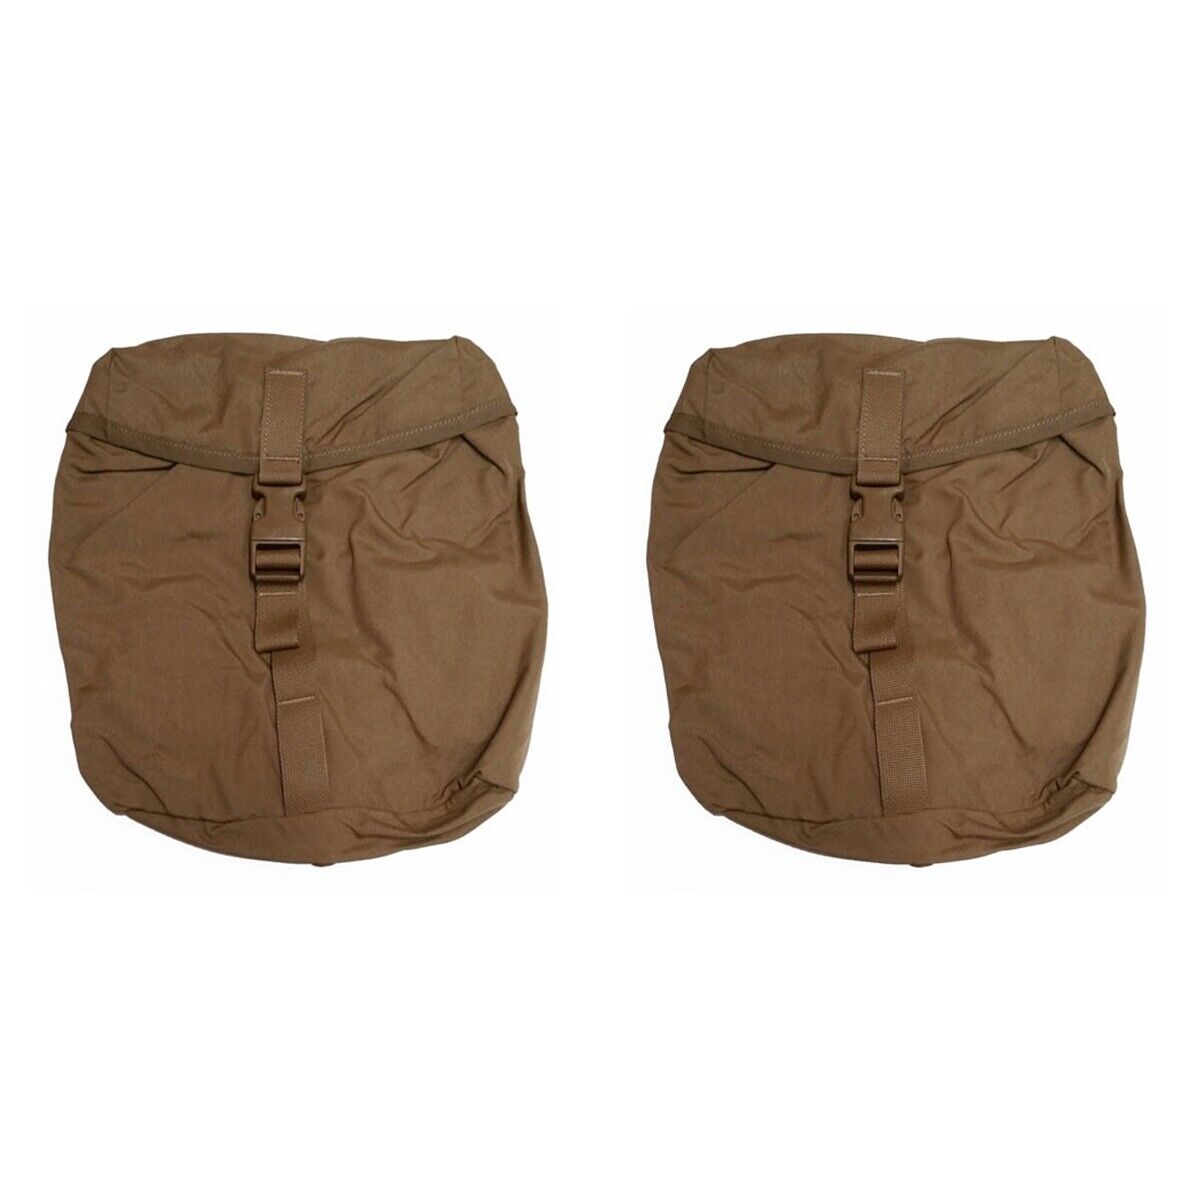 2 Pack Sustainment Pouch CIF USMC Molle Coyote FILBE - New